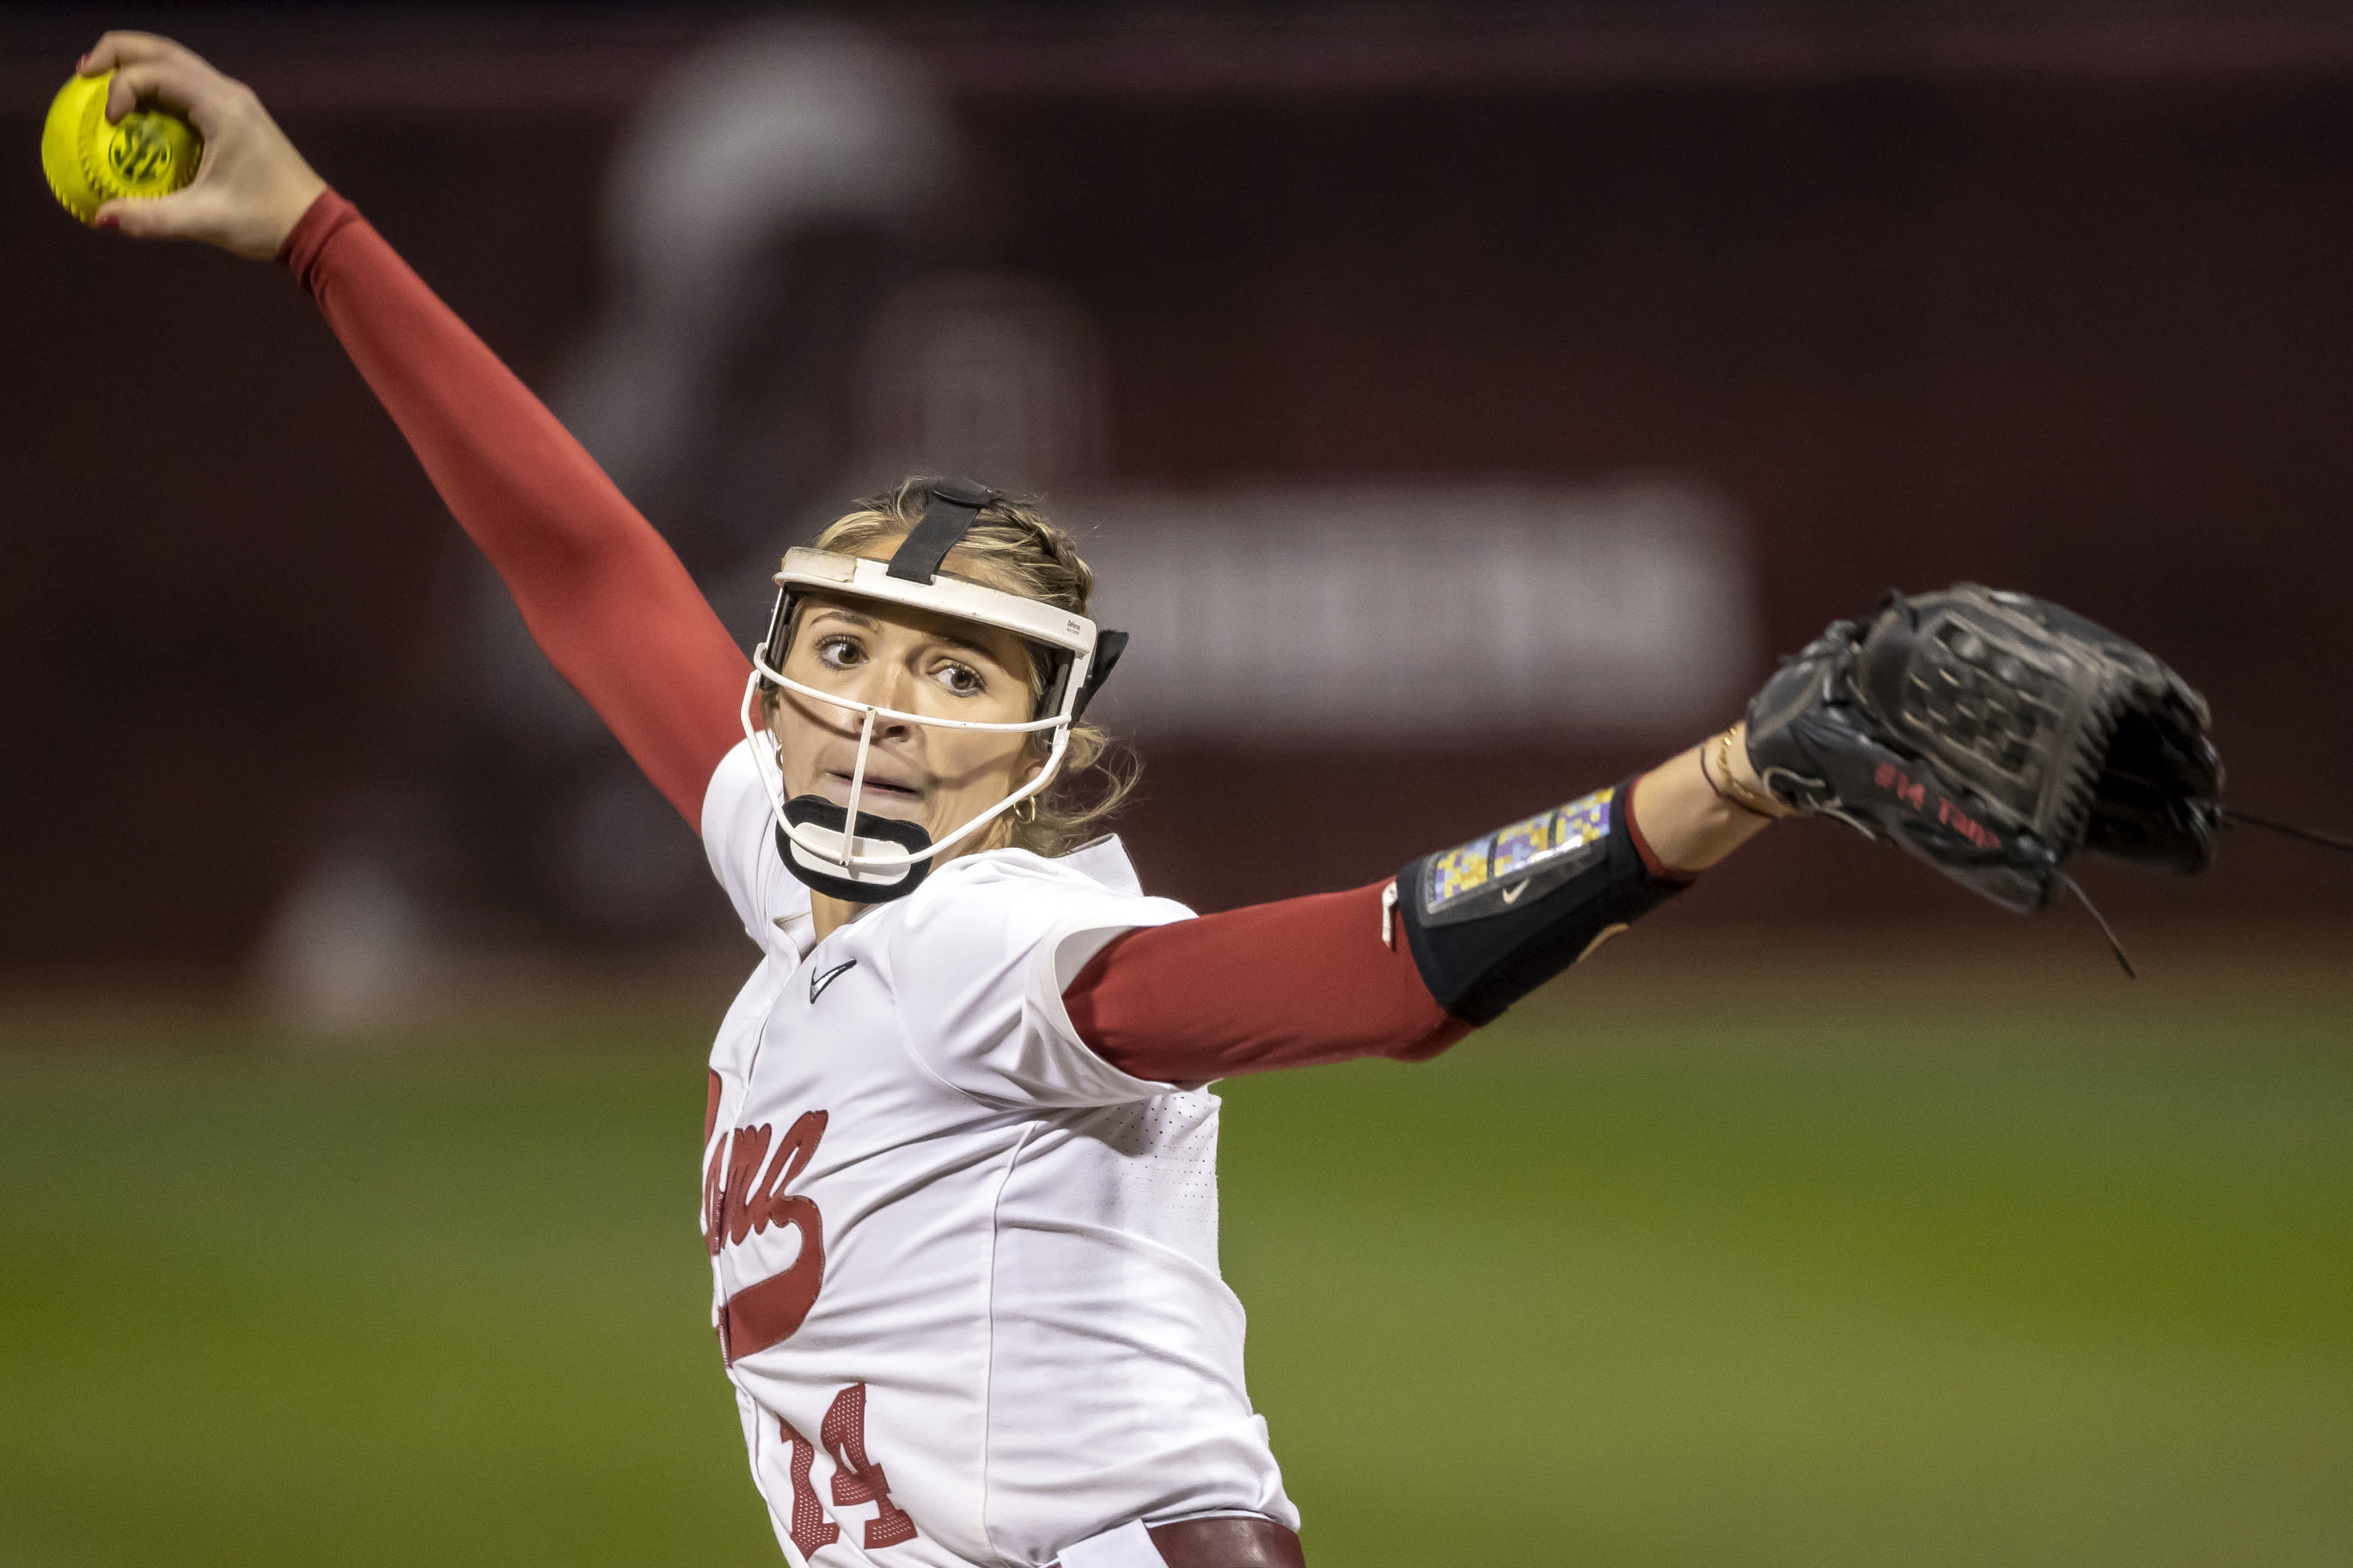 Former Alabama pitcher Montana Fouts to join Athletes Unlimited for AUX season